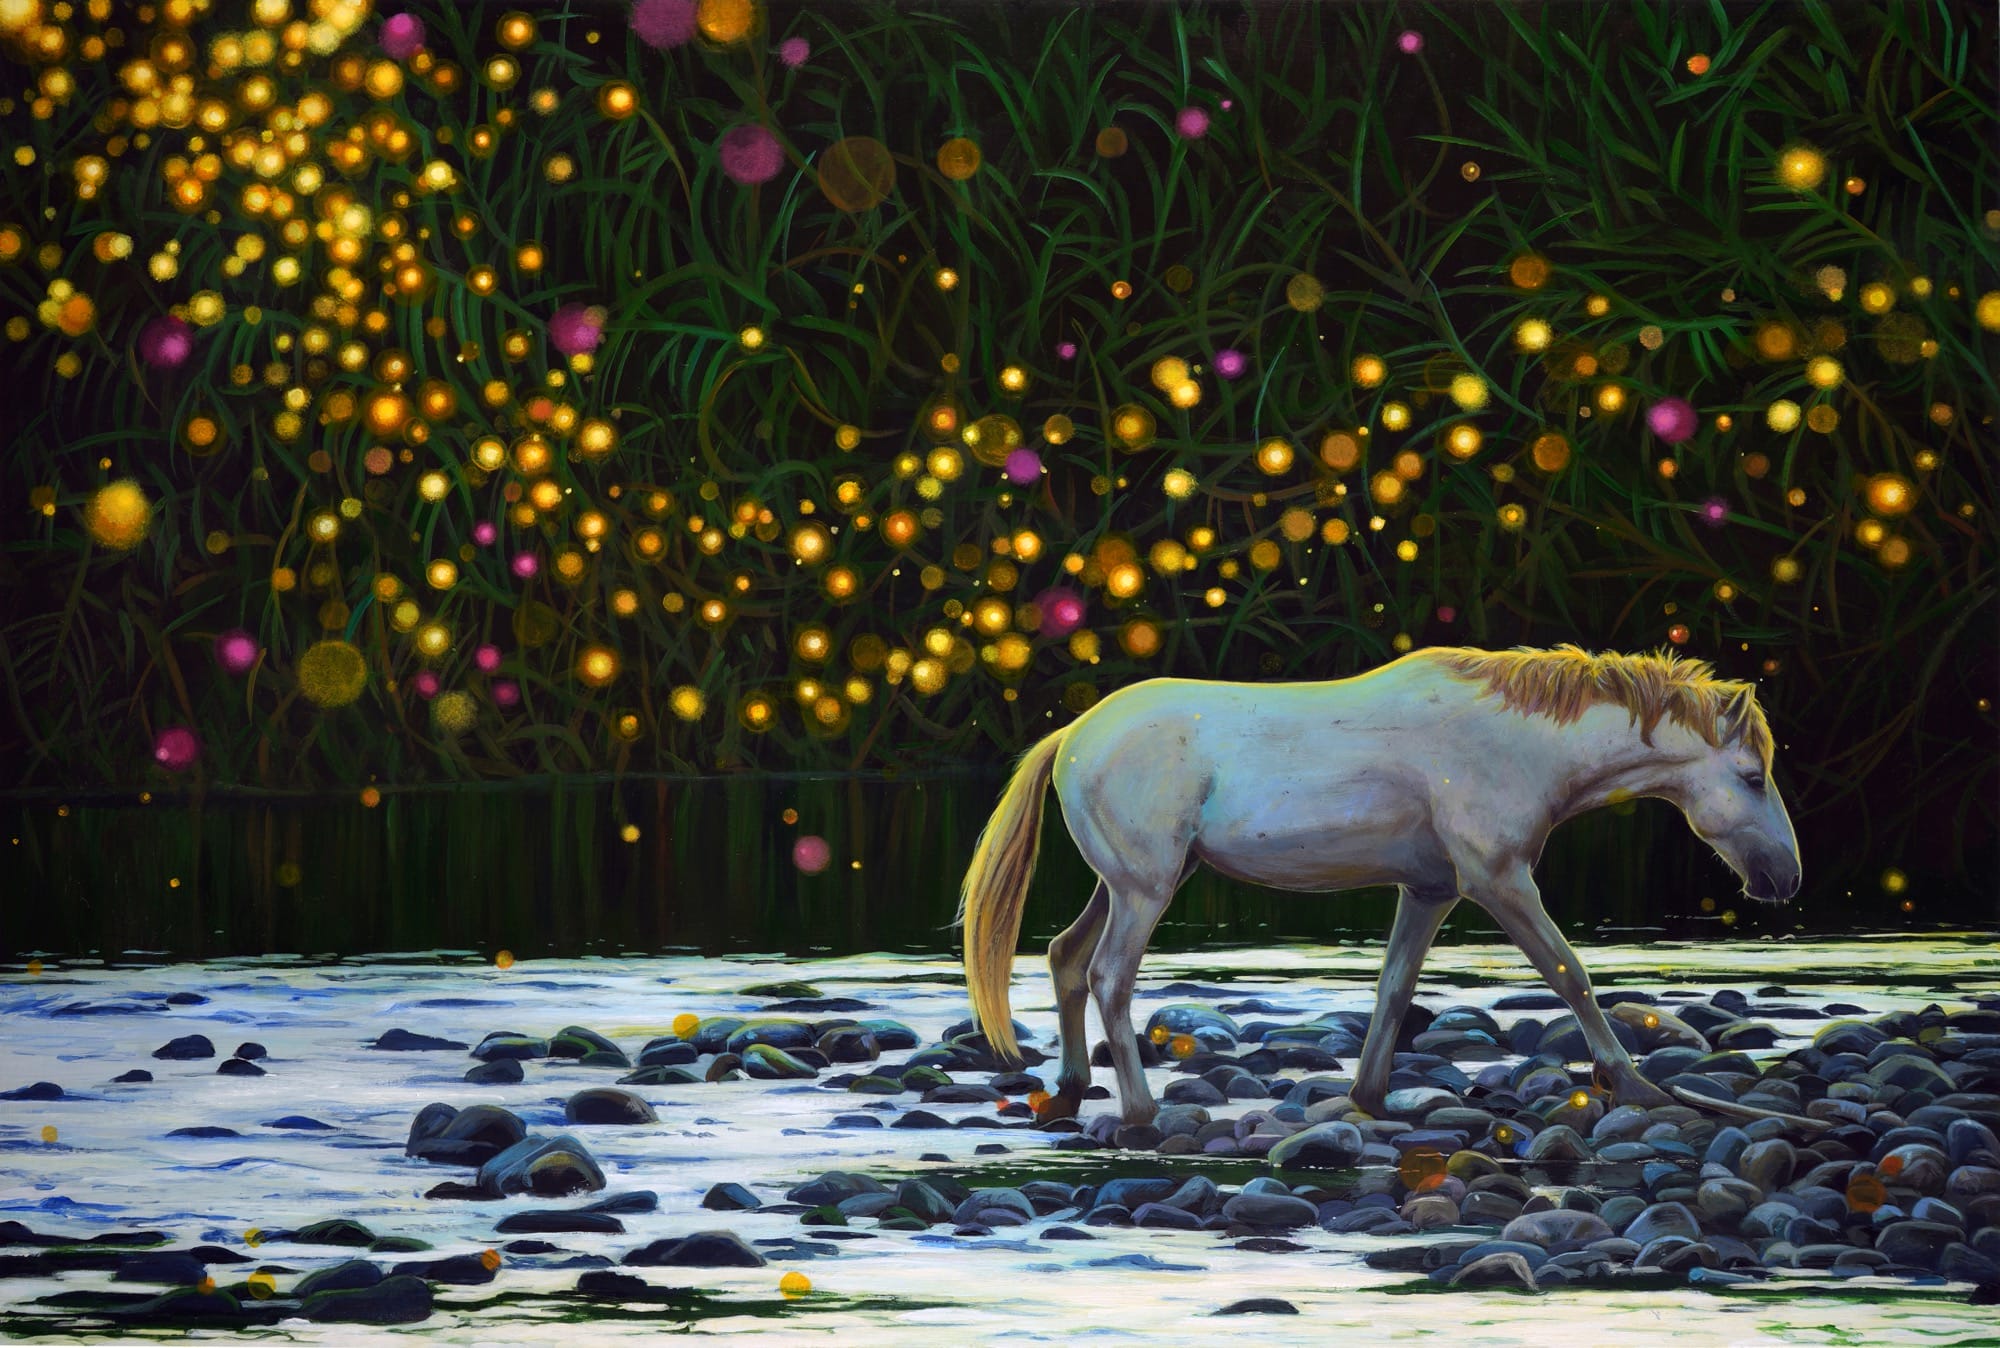 an acrylic painting of a white horse walking on the banks of a river, with glowing yellow spots in the background like fireflies